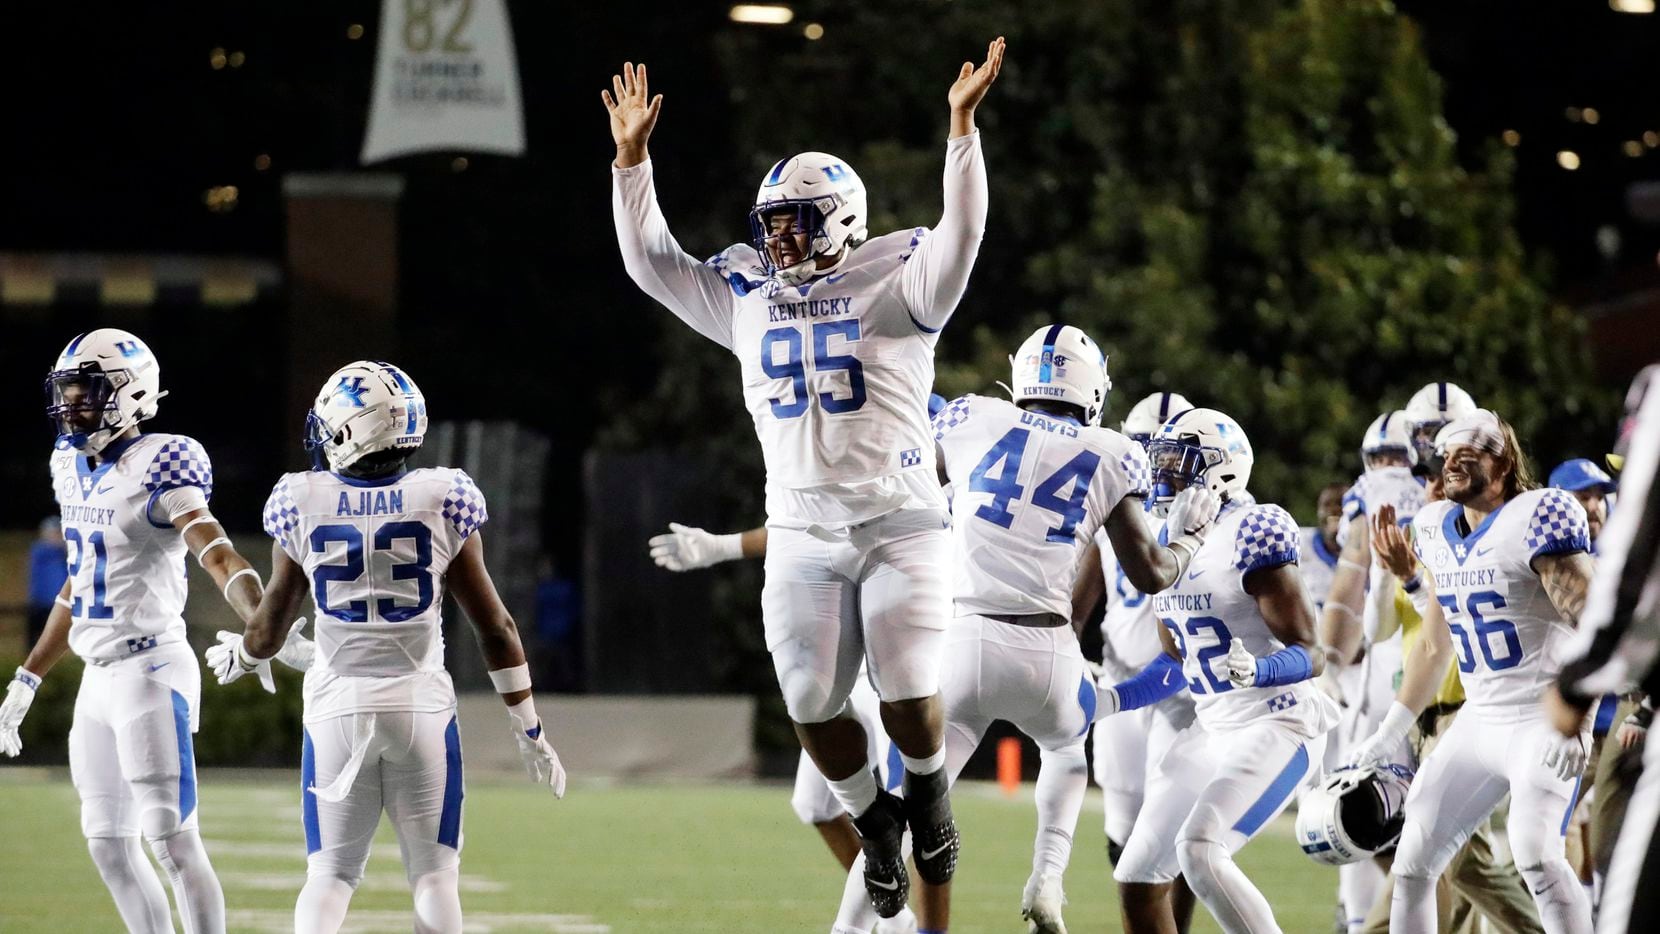 Kentucky nose tackle Quinton Bohanna (95) celebrates after his team stopped a Vanderbilt drive in the fourth quarter of an NCAA college football game Saturday, Nov. 16, 2019, in Nashville, Tenn.